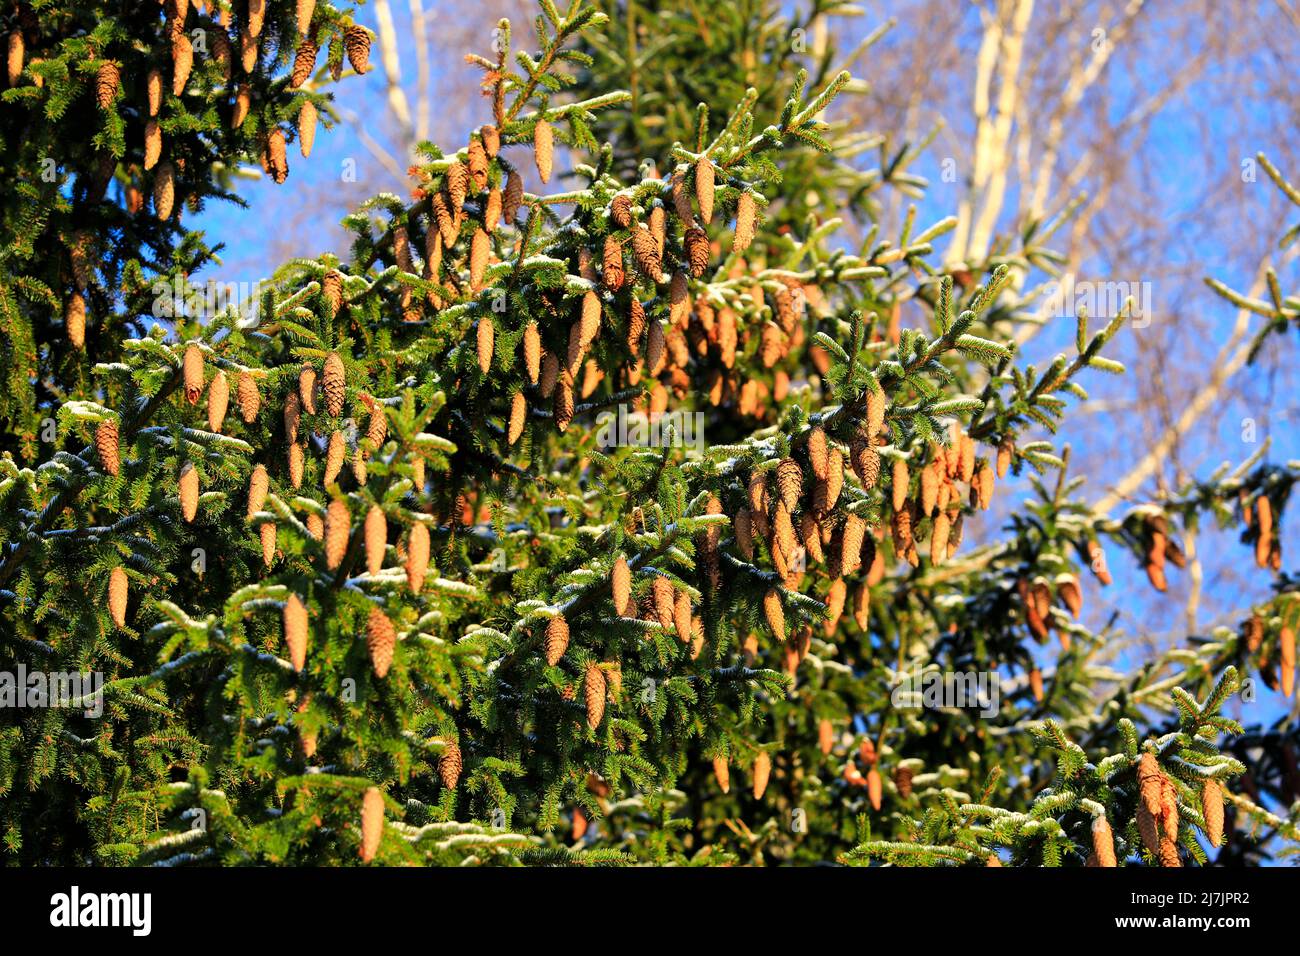 Norway spruce trees, Picea abies, growing in forest in Finland, branches carrying lots of cones. Blue sky and birch tree background. January 2022. Stock Photo